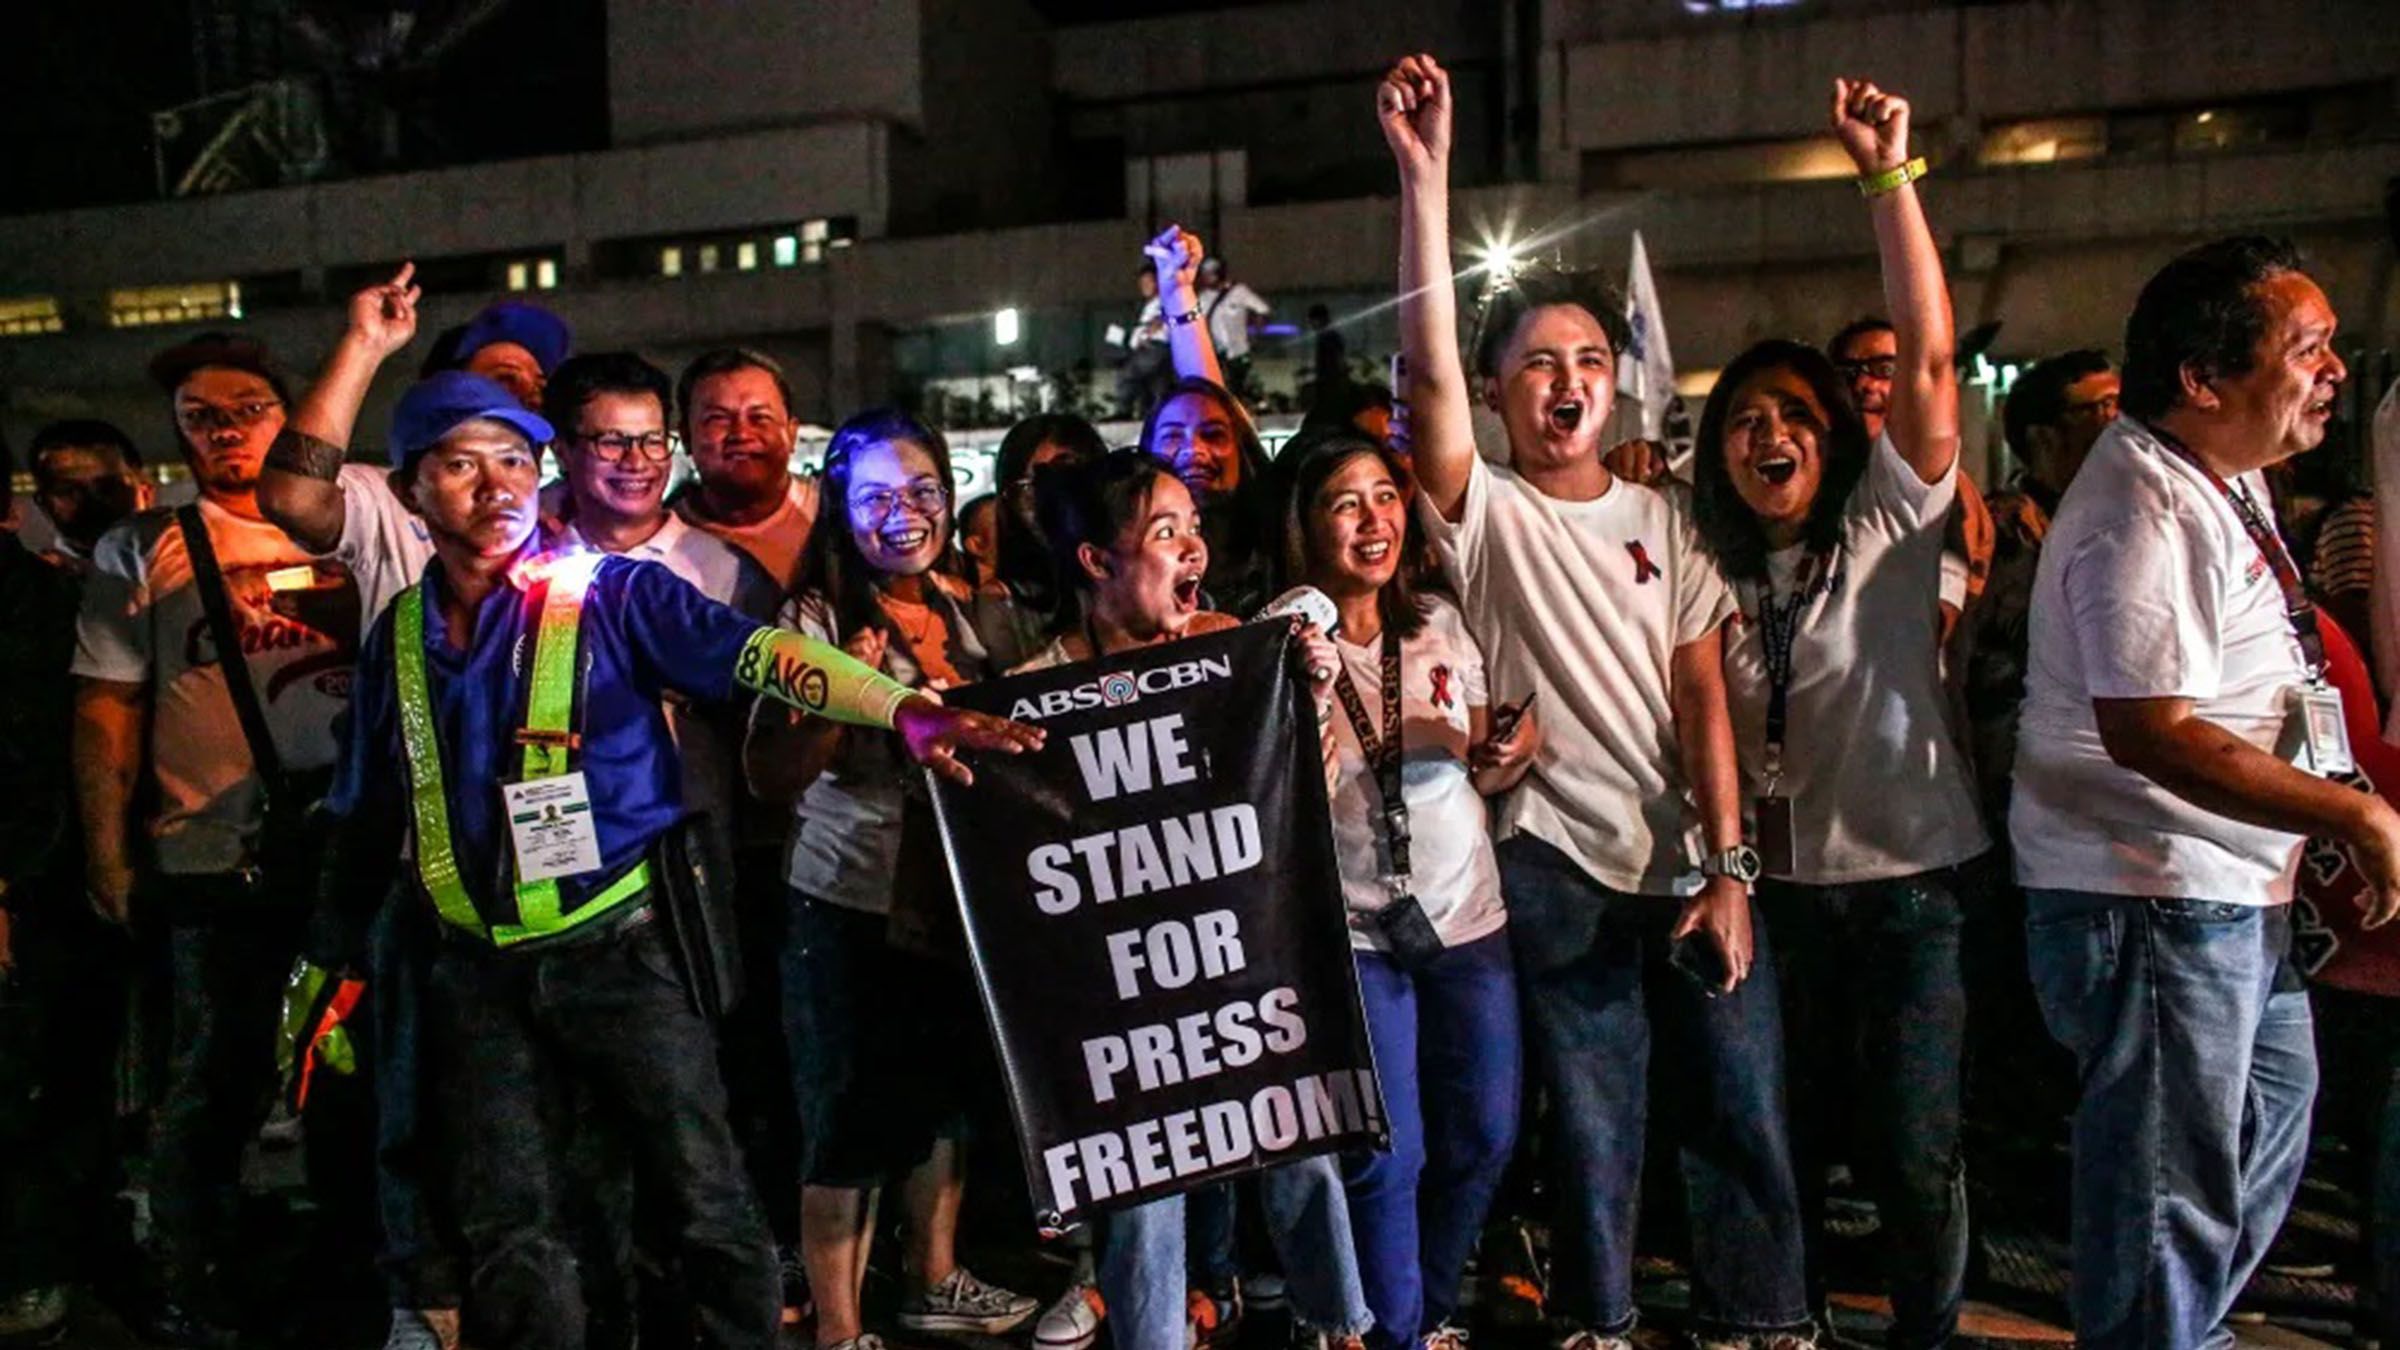 Press freedom paves road to democracy